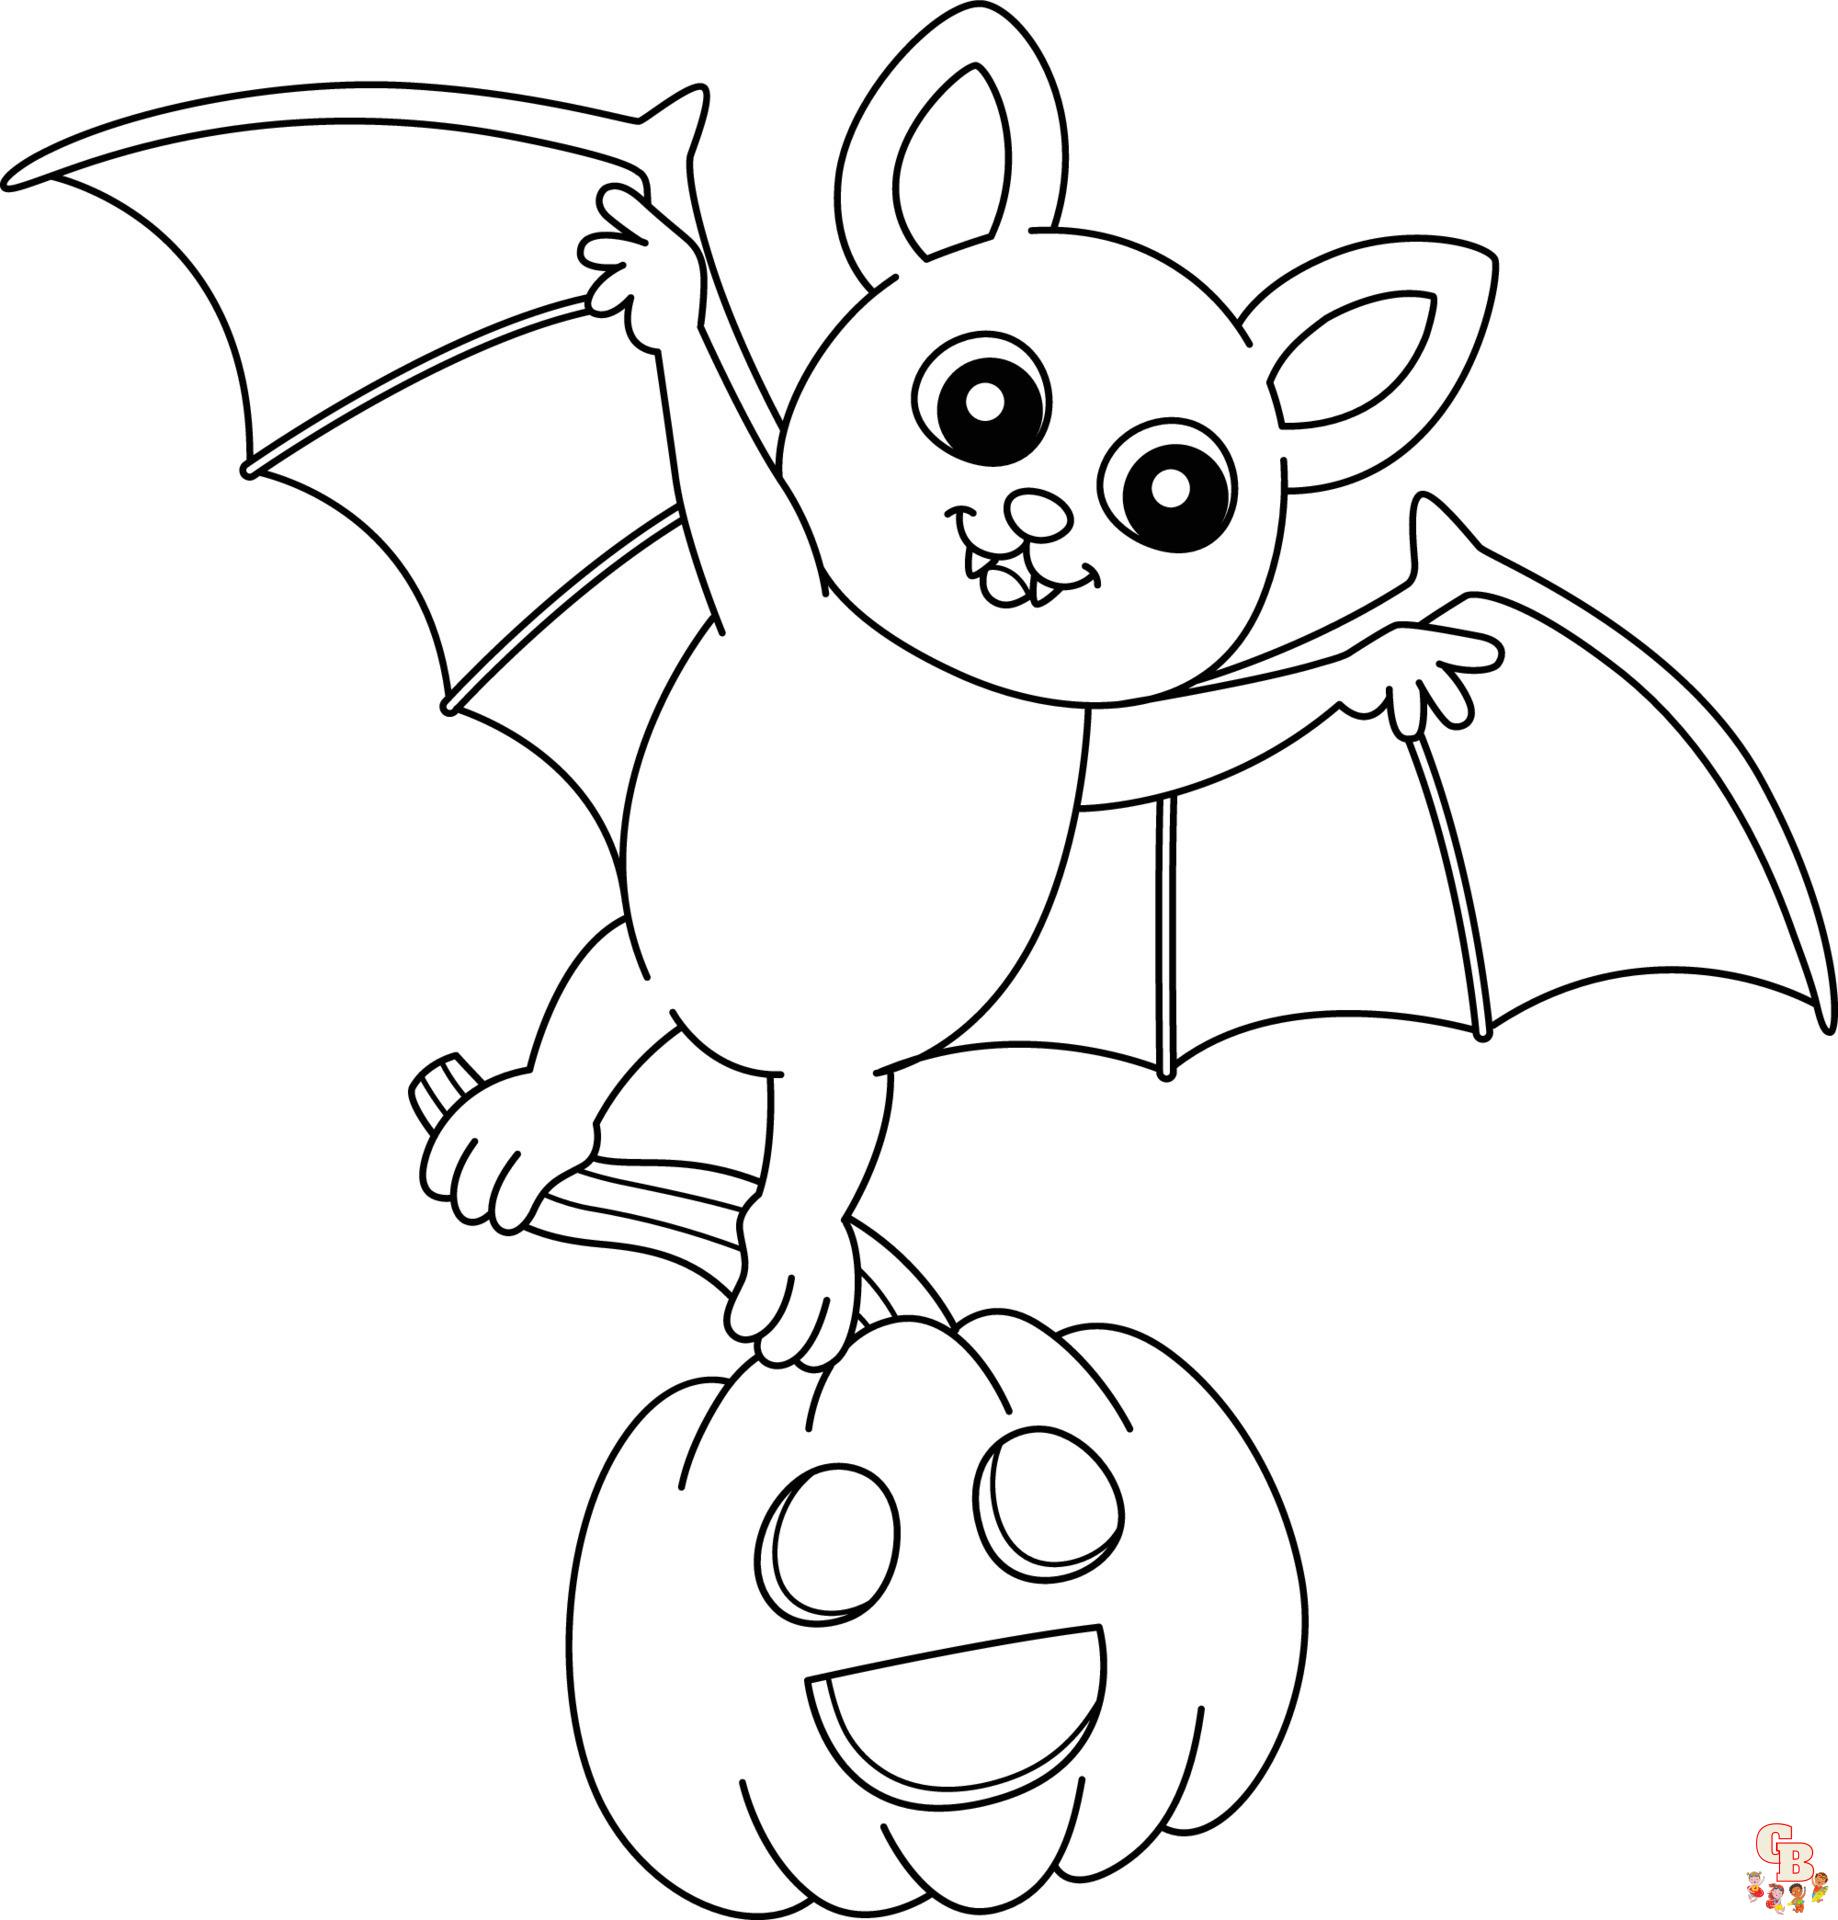 Easy Cute Halloween Coloring Pages - Printable and Free Coloring